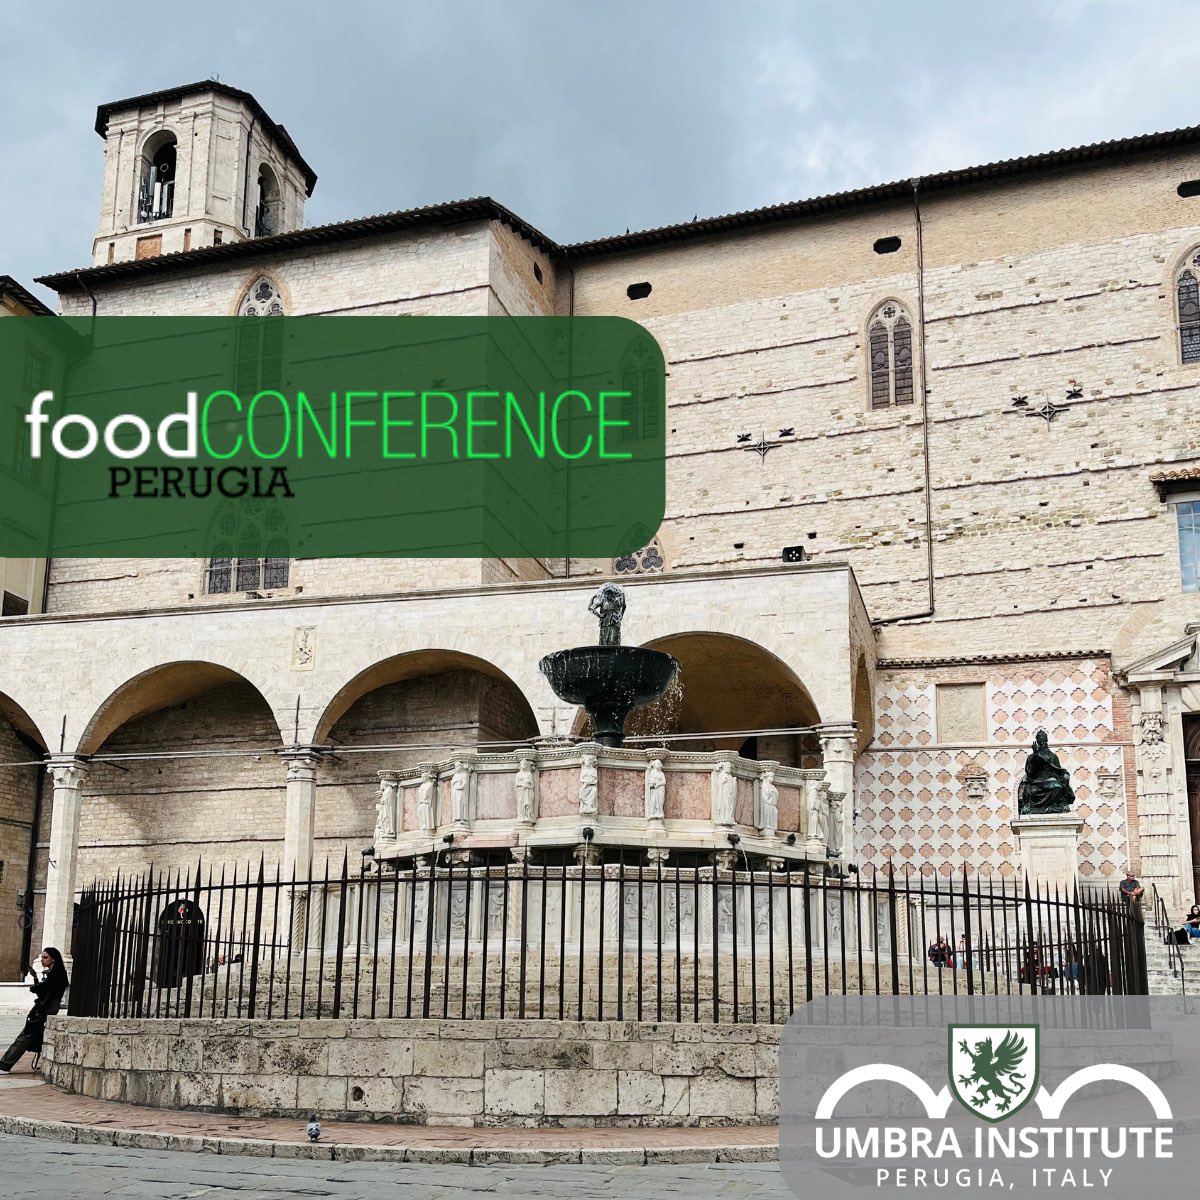 You should get there if you are looking for a substantial yet intimate conference at a terrific location with very good food The conference lunches are the best I have had! ** Food & Hybridity Food Conference Perugia at The Umbra Institute Perugia, Italy 13-16 June 2024 The…